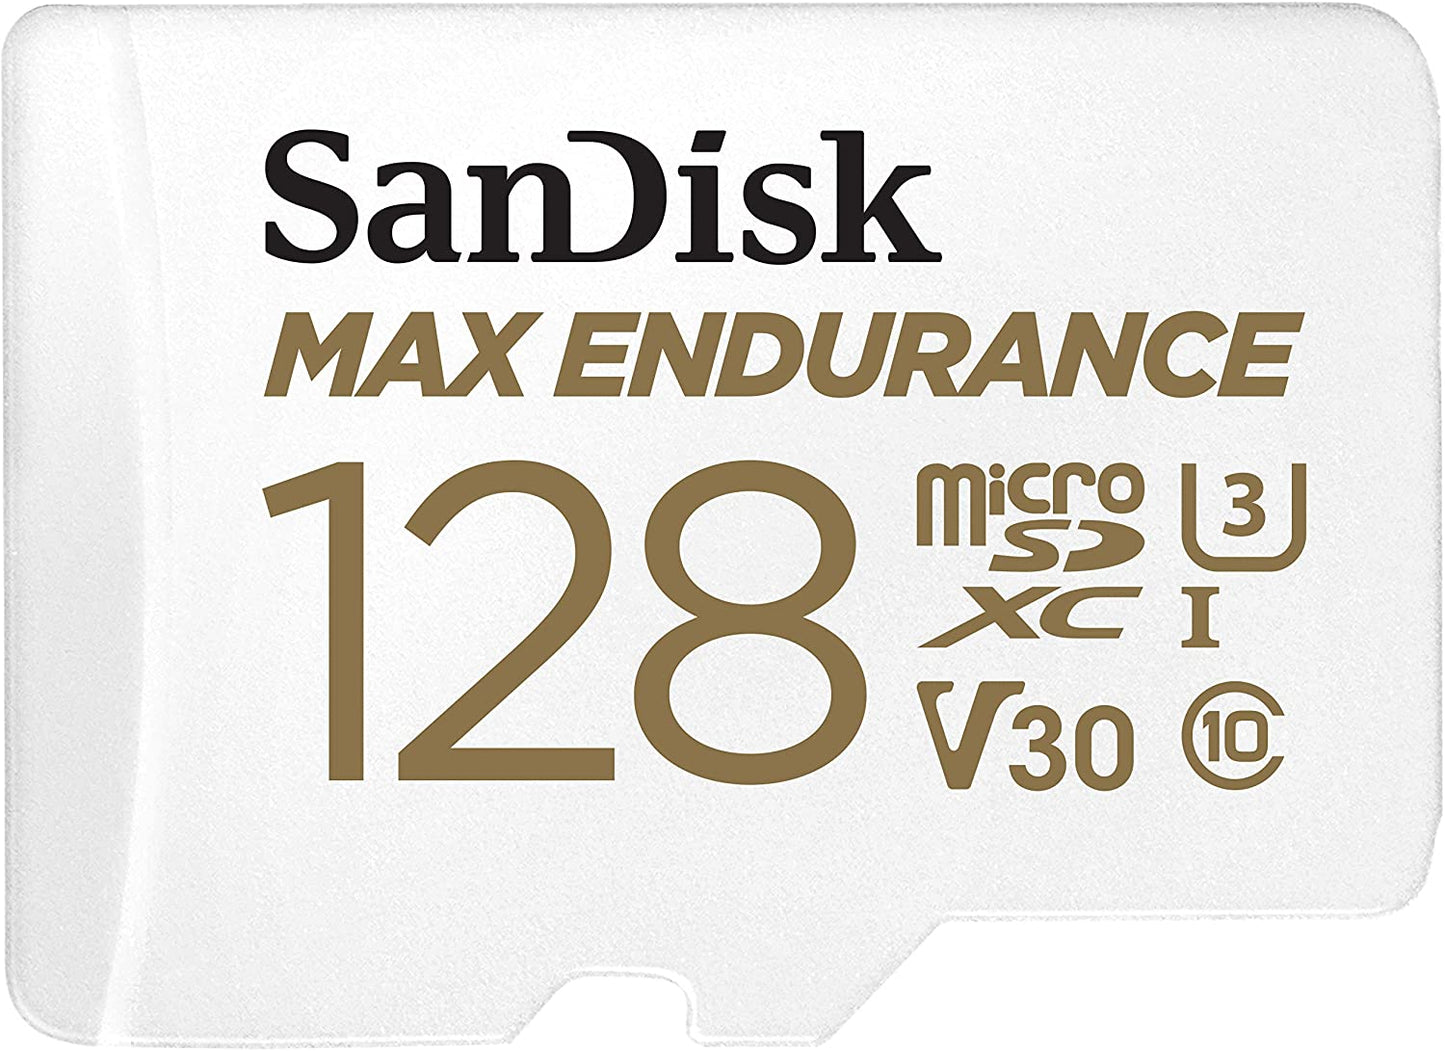 SanDisk MAX ENDURANCE microSD Card U3, V30, 4K UHD SDXC Class 10, 100mb/s and 40mb/s Read and Write Speed with Adapter (32GB, 64GB, 128GB, 256GB)